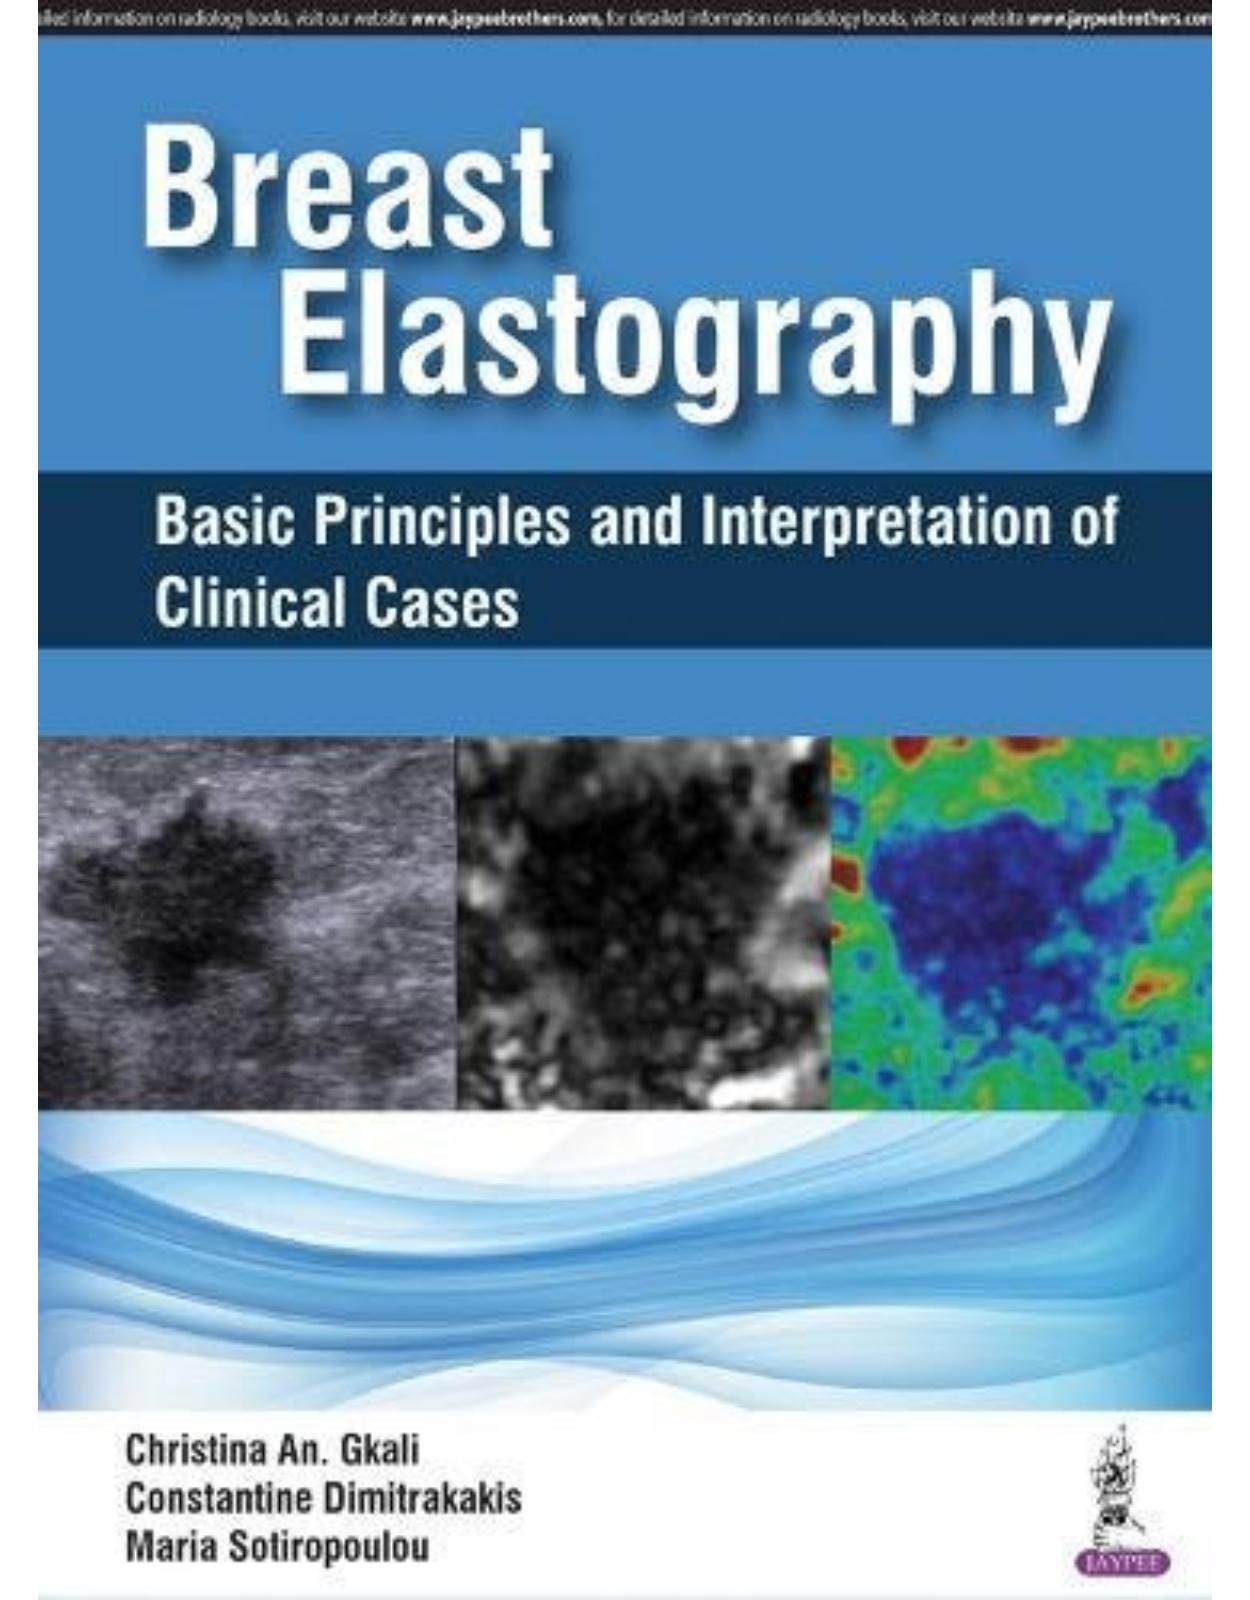 Breast Elastography: Basic Principles and Interpretation of Clinical Cases